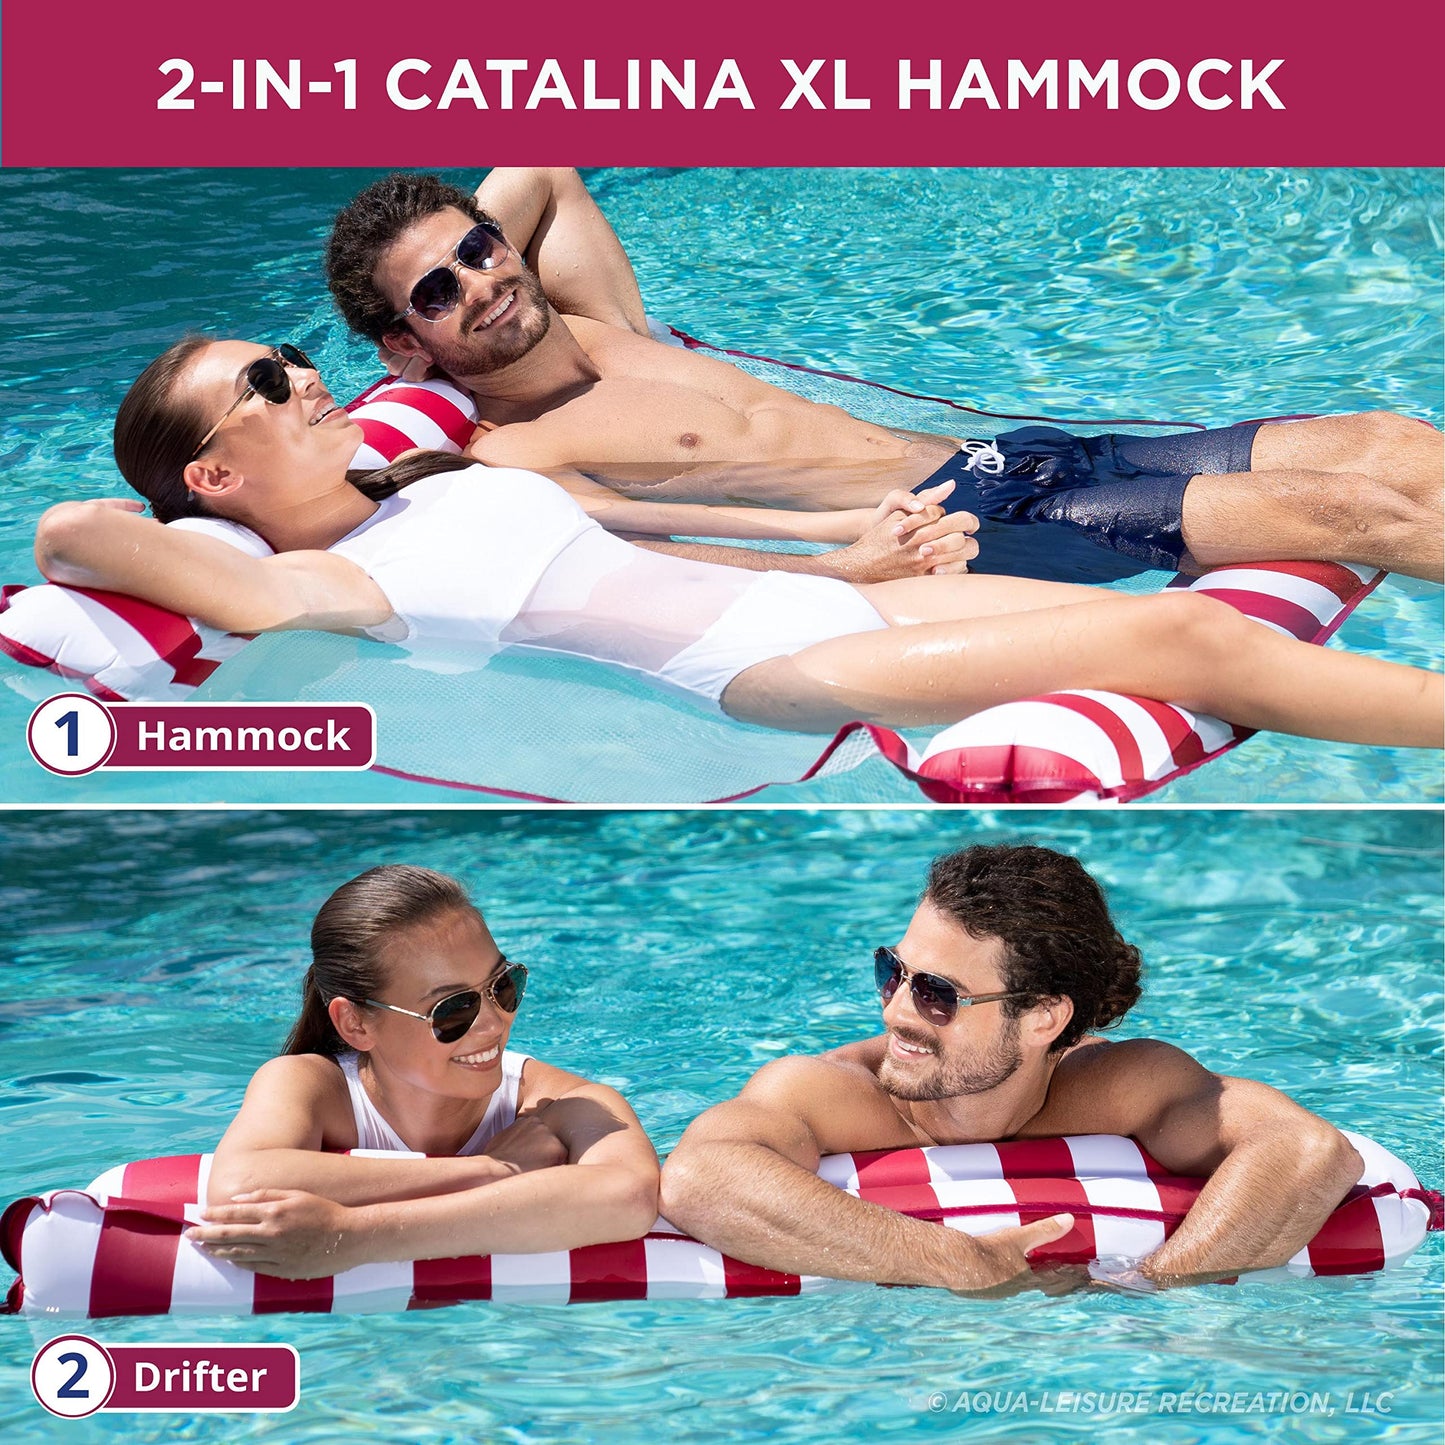 Aqua Original 4-in-1 Monterey Hammock Pool Float & Water Hammock – Multi-Purpose, Inflatable Pool Floats for Adults – Patented Thick, Non-Stick PVC Material Burgundy – 1-2 Person Xl Hammock